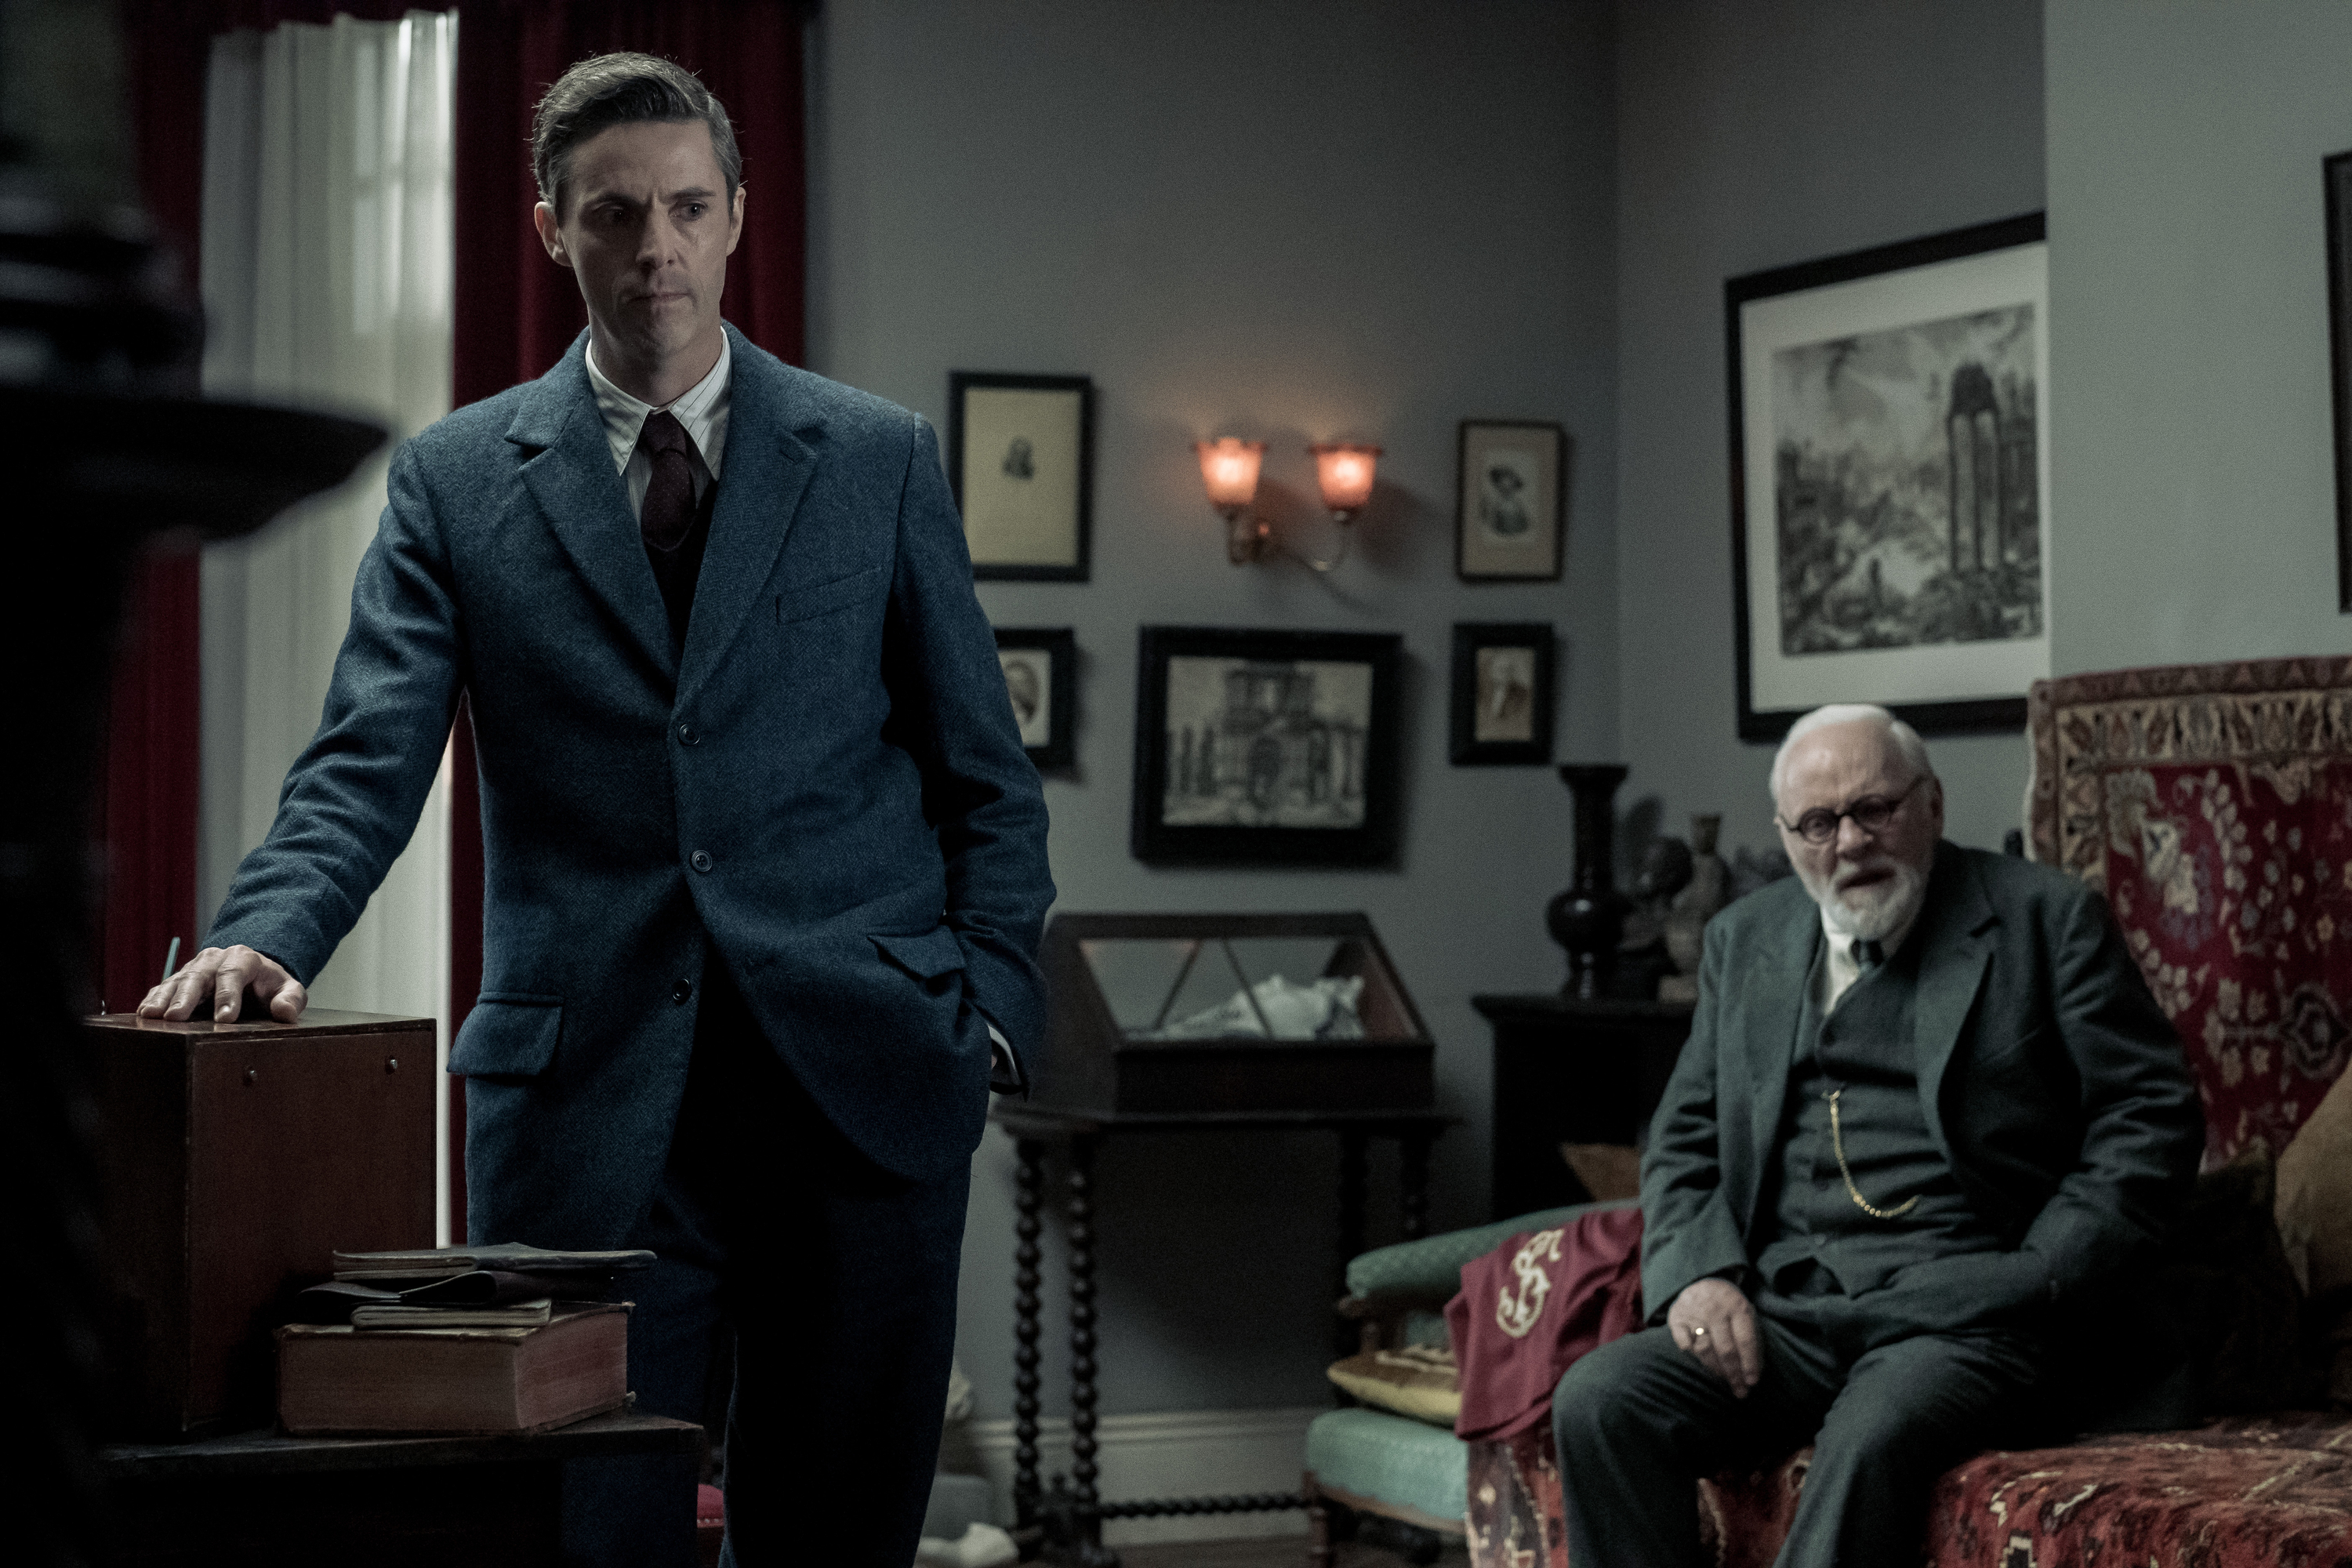 Matthew Goode and Anthony Hopkins star as C.S. Lewis and Sigmund Freud